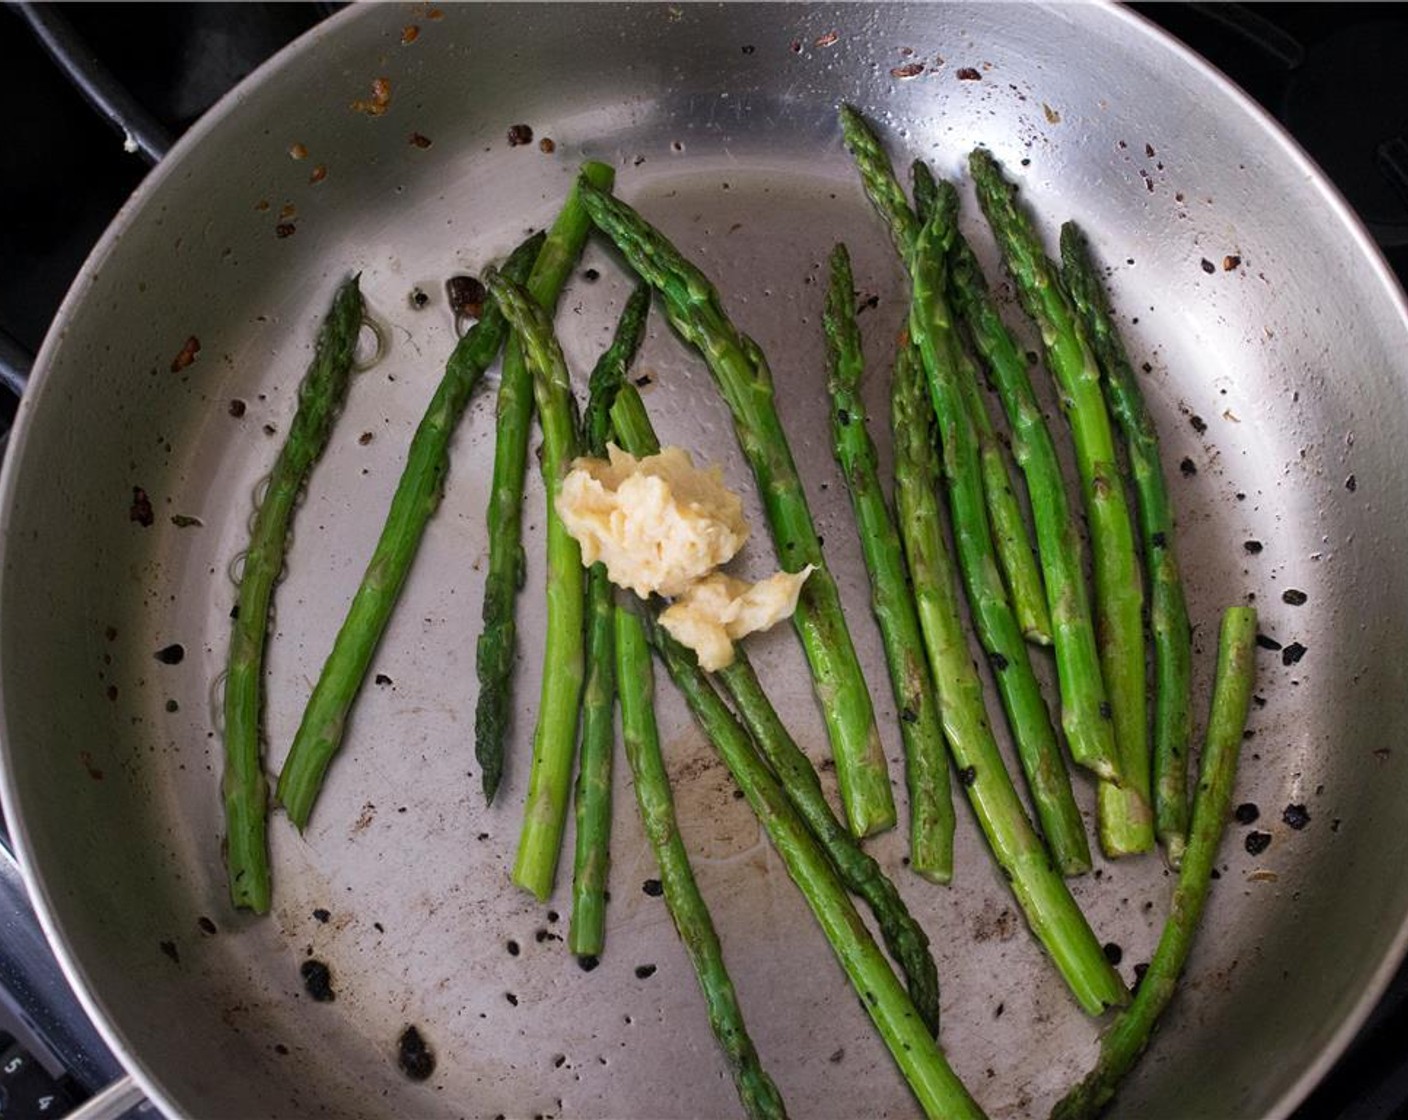 step 7 In a large skillet over medium-high heat, heat 1 tbsp of olive oil.  Add asparagus to the skillet. Cook for 2 minutes, turning occasionally.  Add 1 tbsp of the roasted garlic miso butter. cook the asparagus for another minute, until tender.